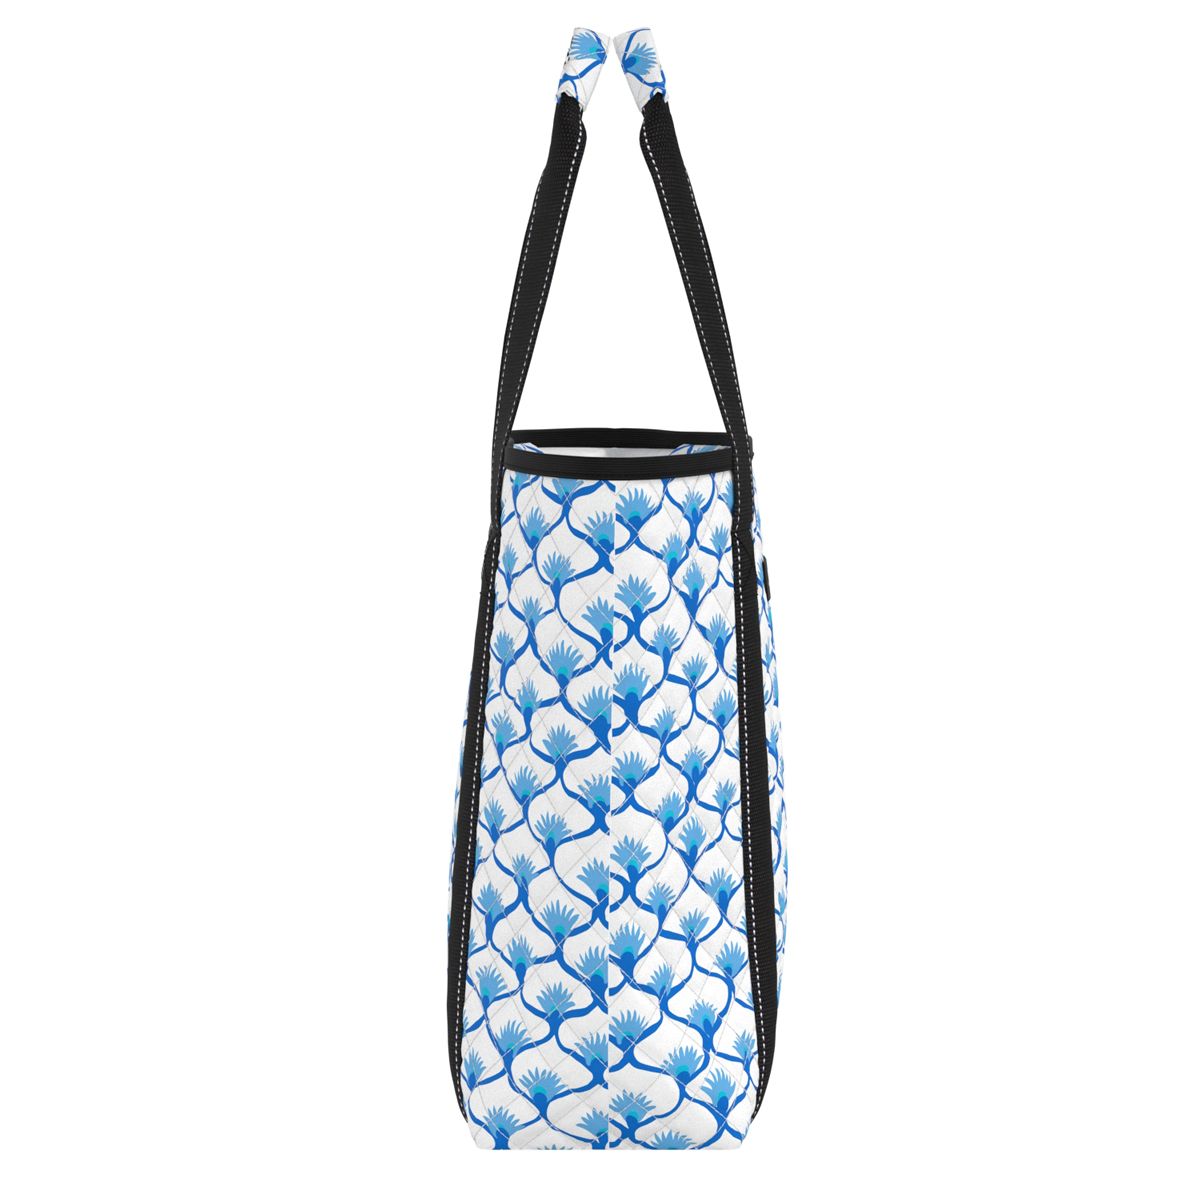 Reese Tall Tote by Scout - Fanna White